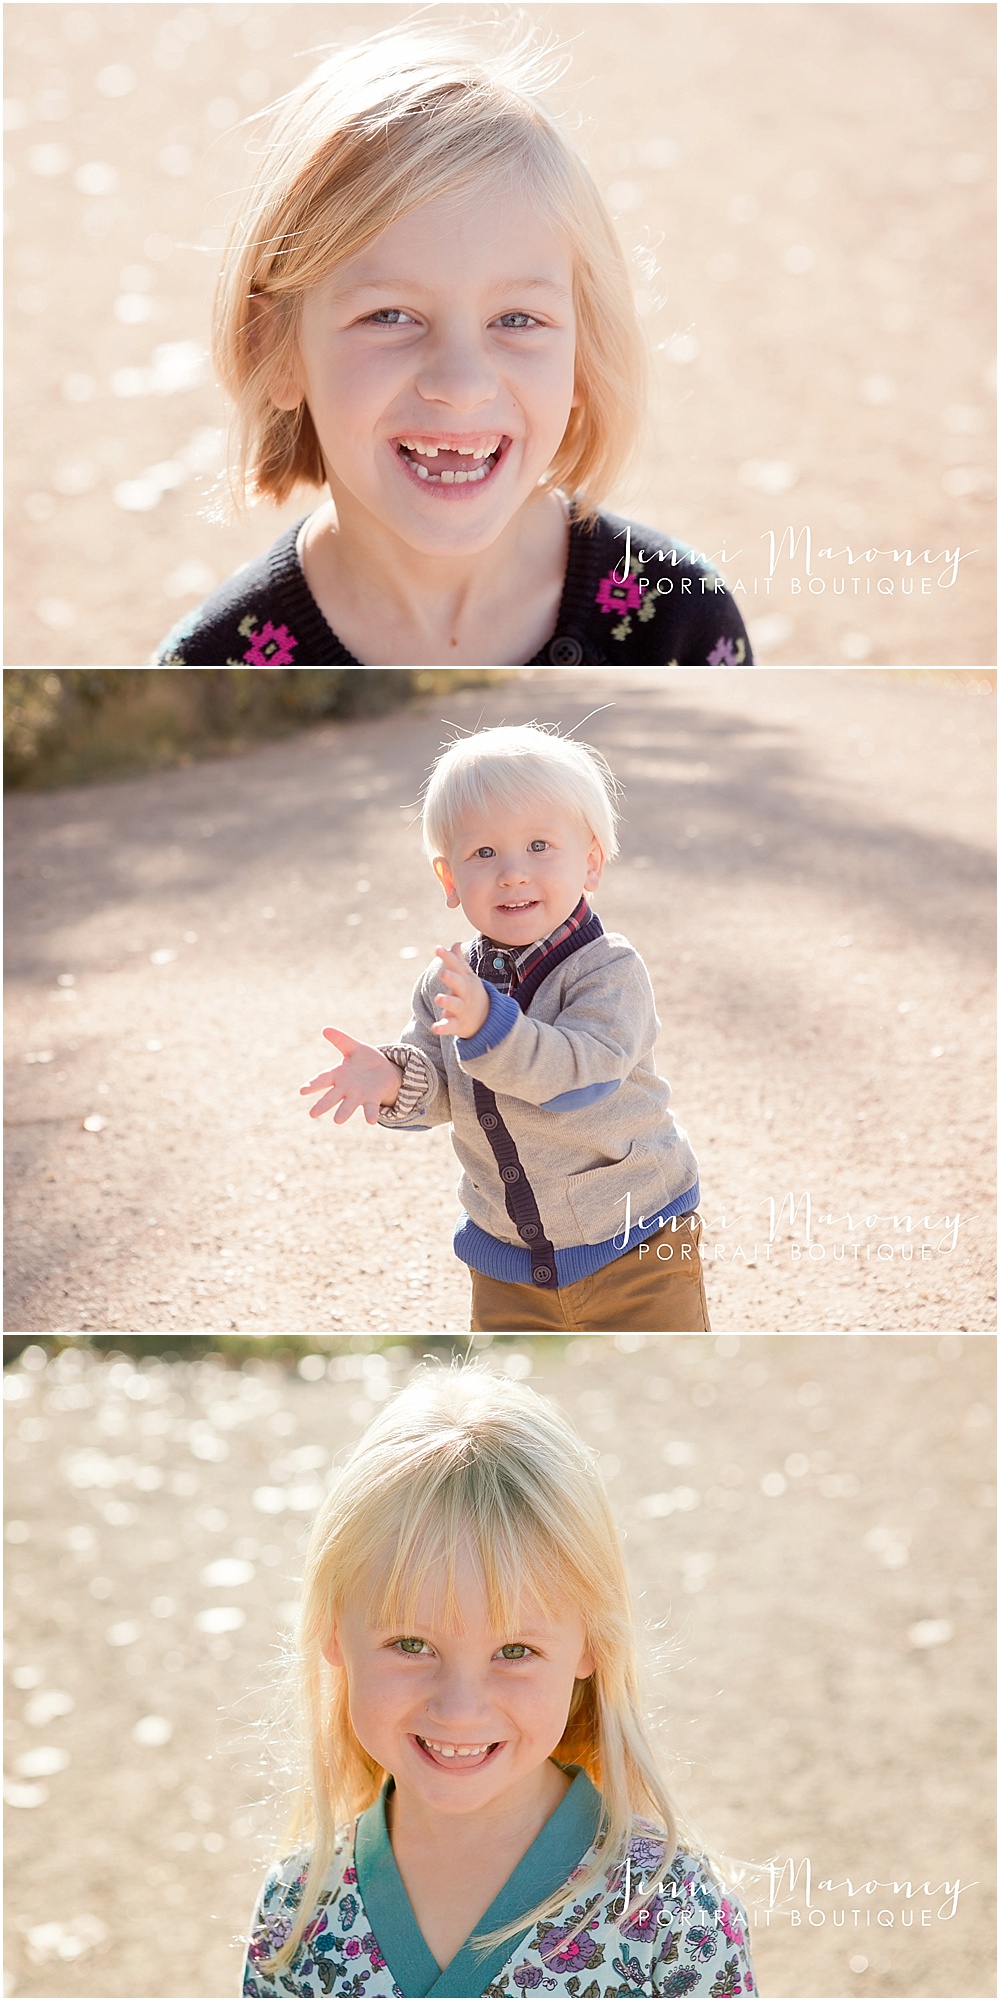 Outdoor, sunny, Boulder Colorado family photography session with photographer Jenni Maroney.